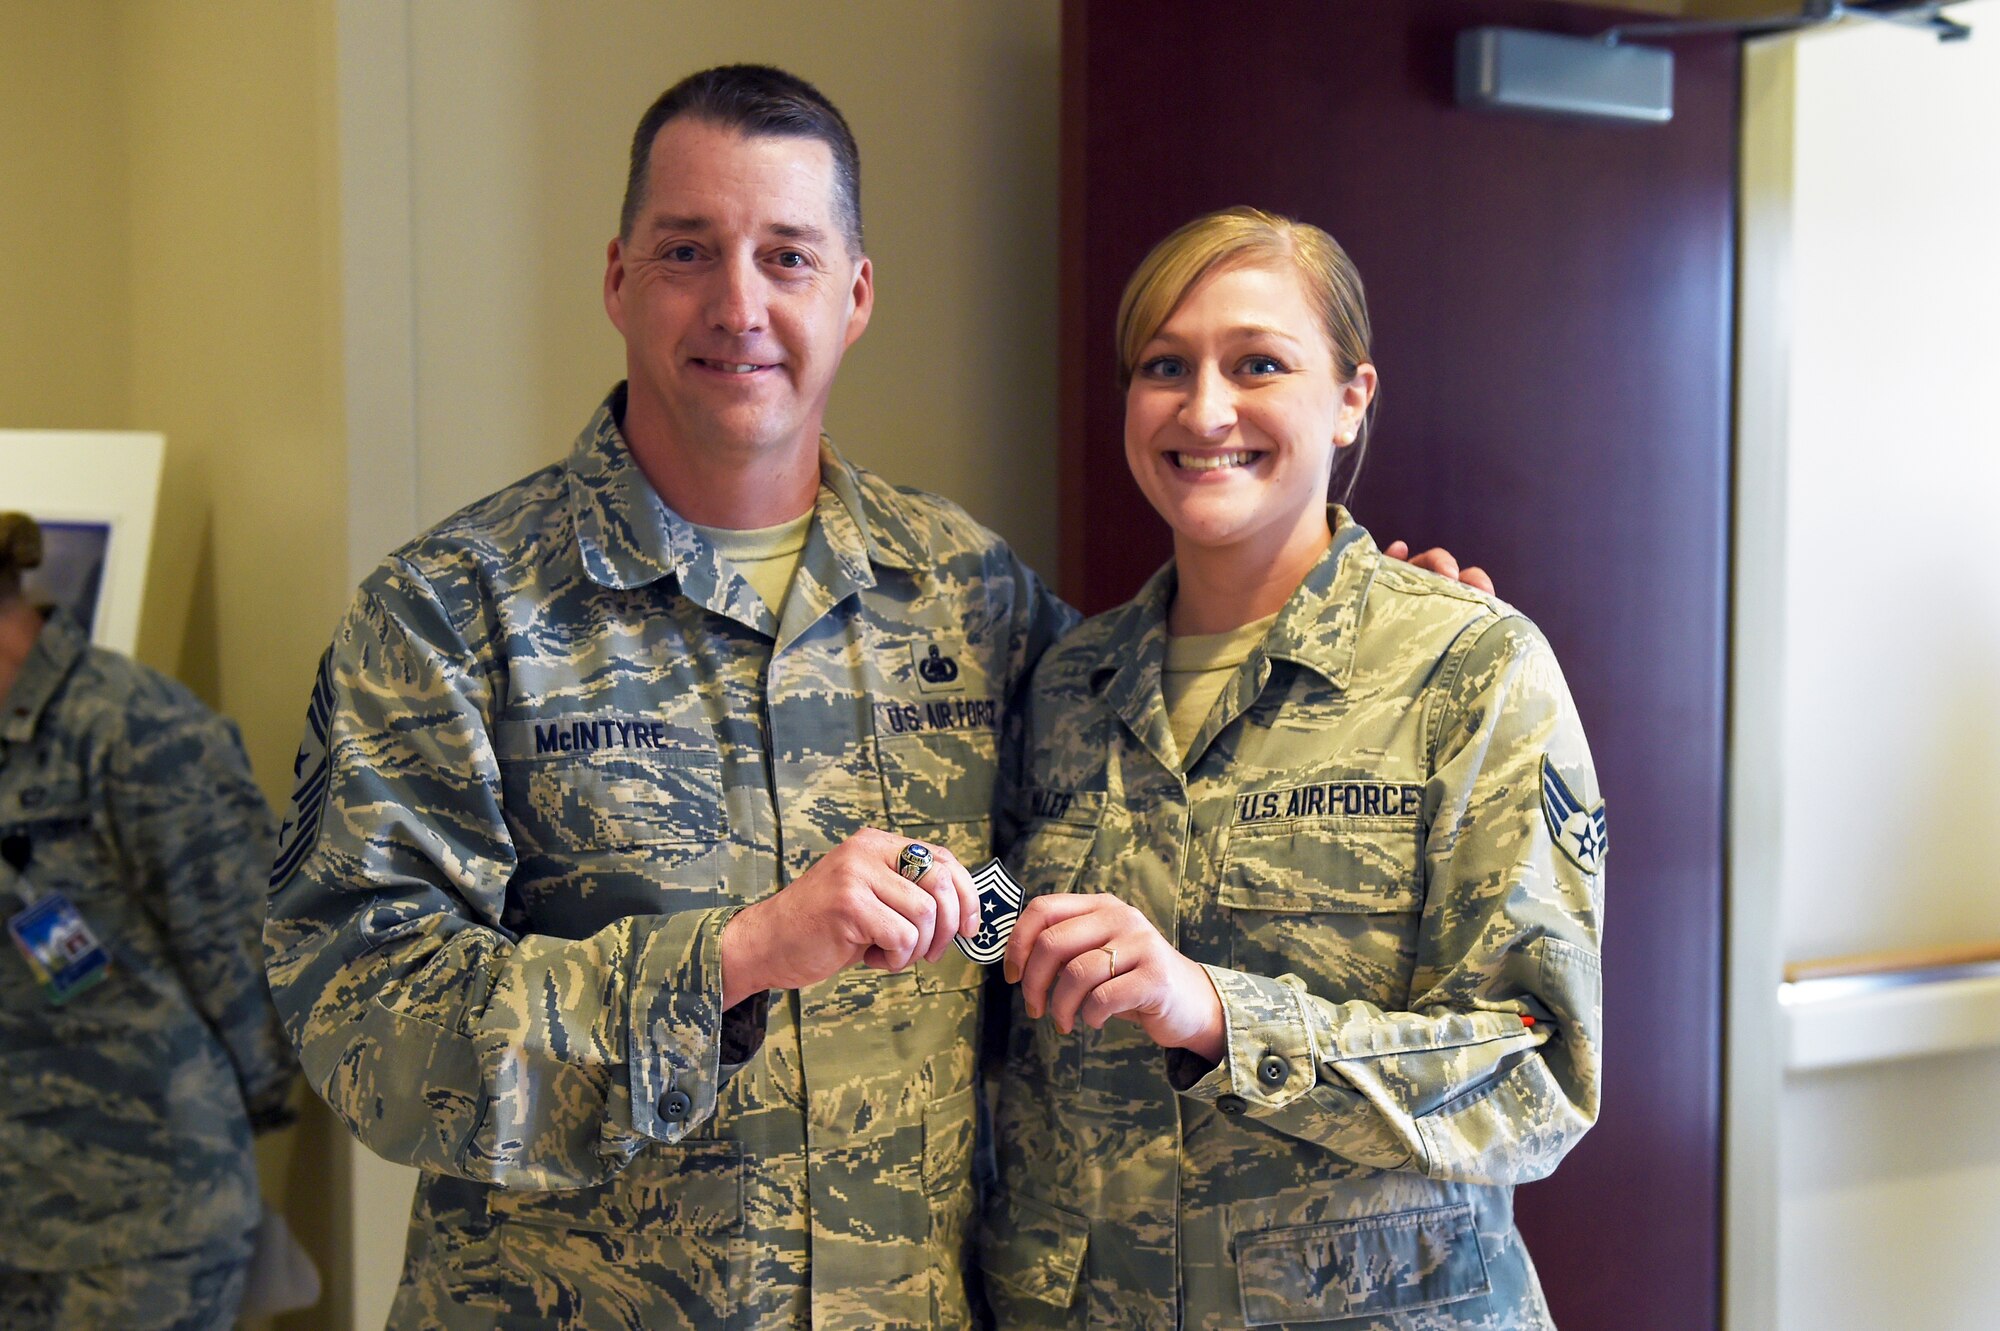 Chief Master Sgt. Douglas McIntyre, Air Force Space Command command chief, coins Senior Airman Christina Miller, 460th Medical Group, during his base visit April 9, 2015, on Buckley Air Force Base, Colo. During his visit, McIntyre spoke on Buckley AFB’s vast mission, its importance to national security, and the Airmen who accomplish the mission every day. (U.S. Air Force photo by Airman 1st Class Emily E. Amyotte/Released)